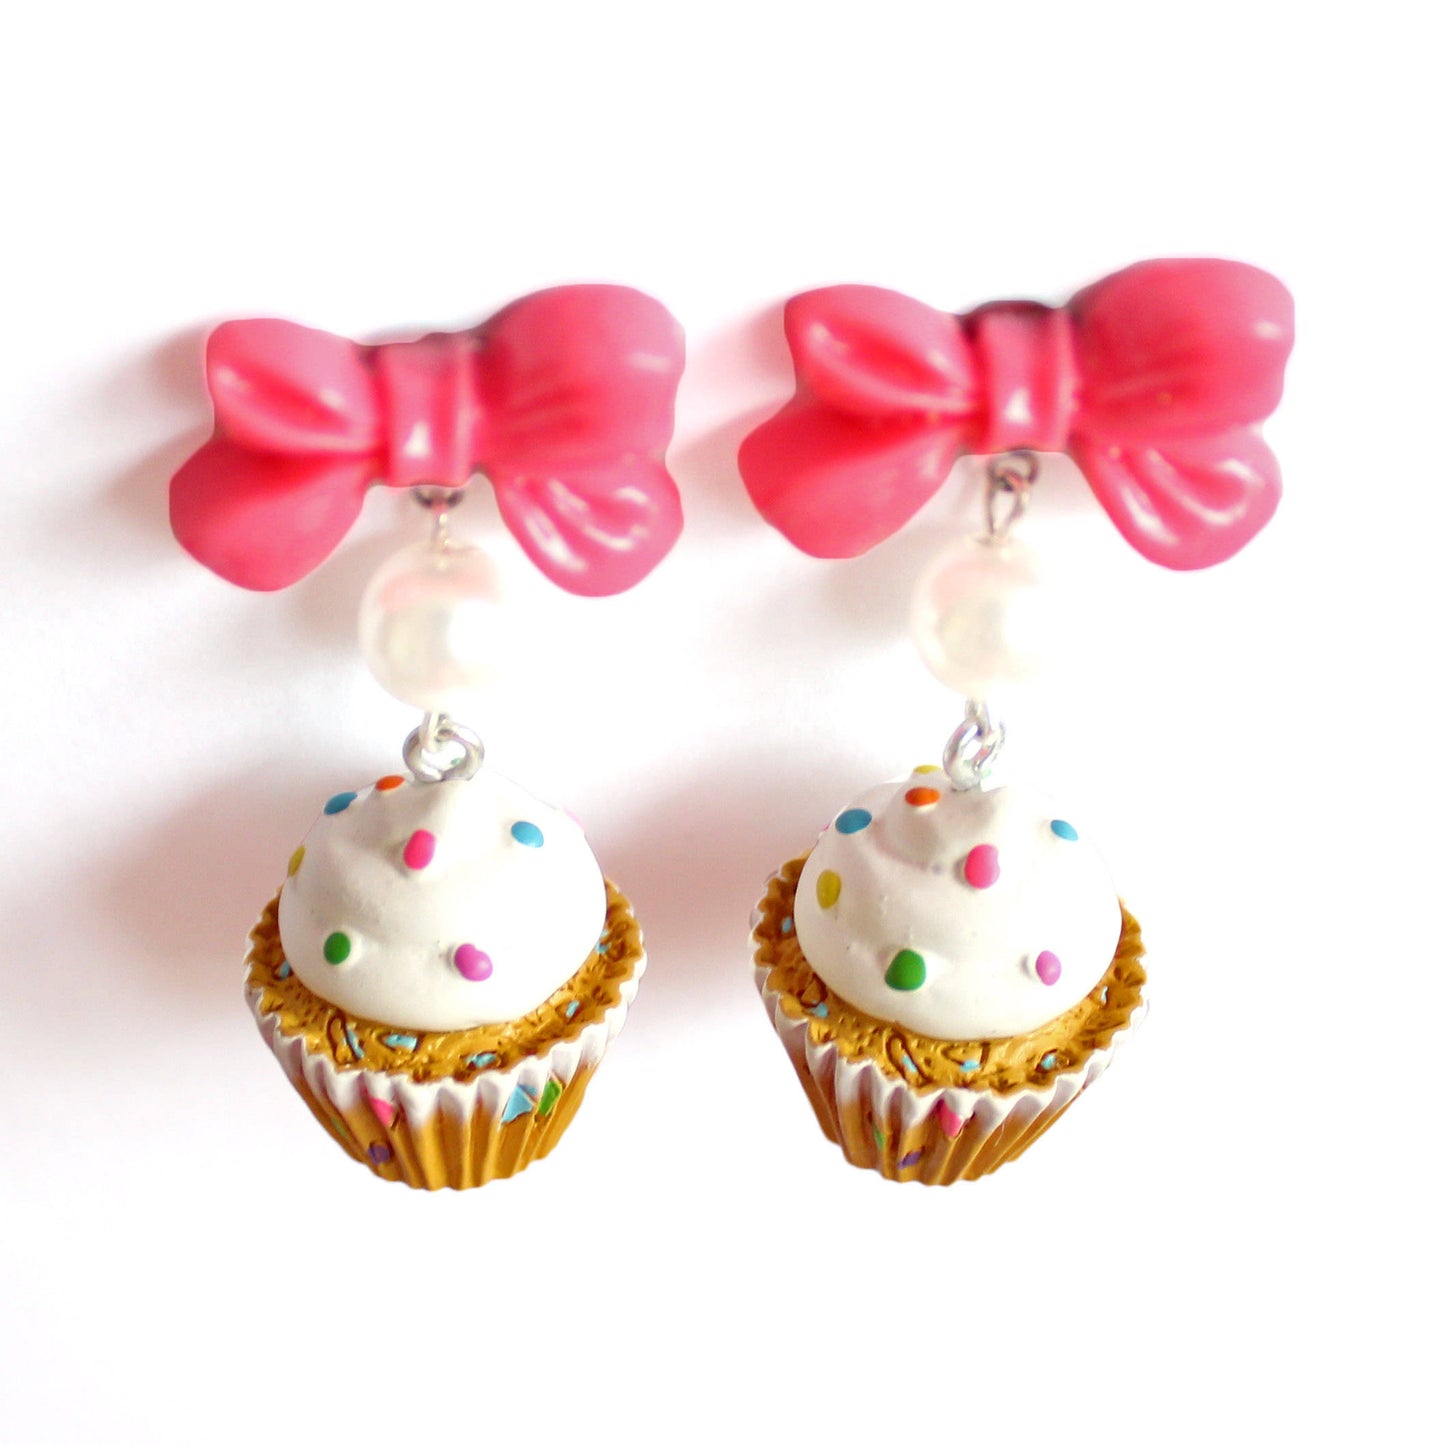 Bow and Pearl Confetti Cupcake Earrings